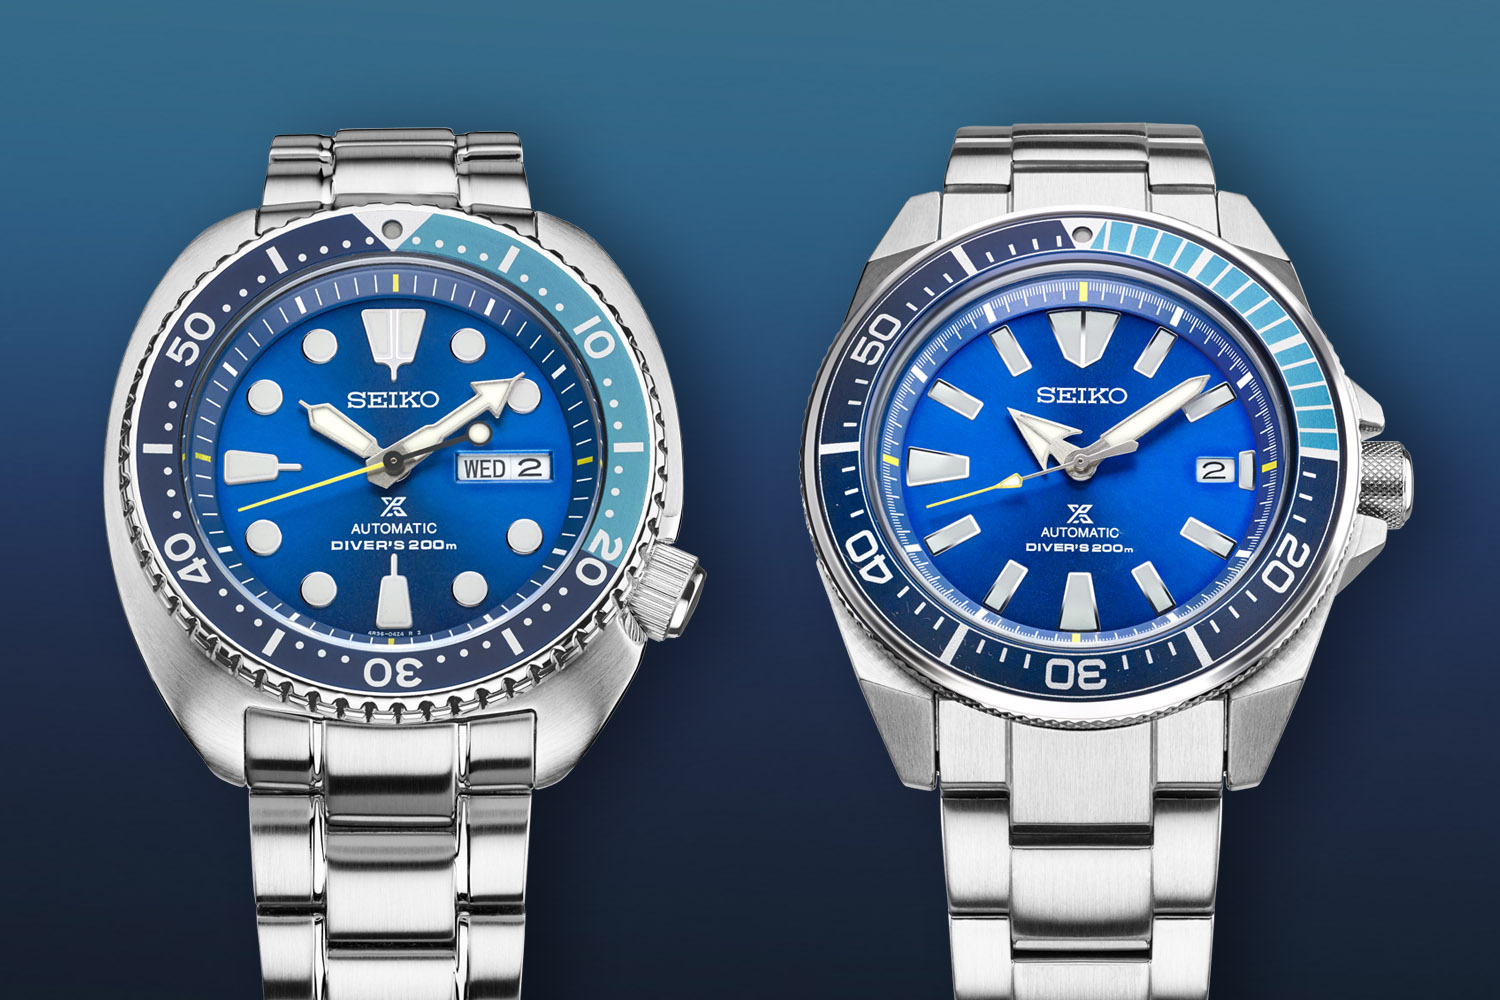 Introducing The Seiko Prospex Turtle SRPB11 and Samurai SRPB09 Blue Lagoon  Limited Edition Watches